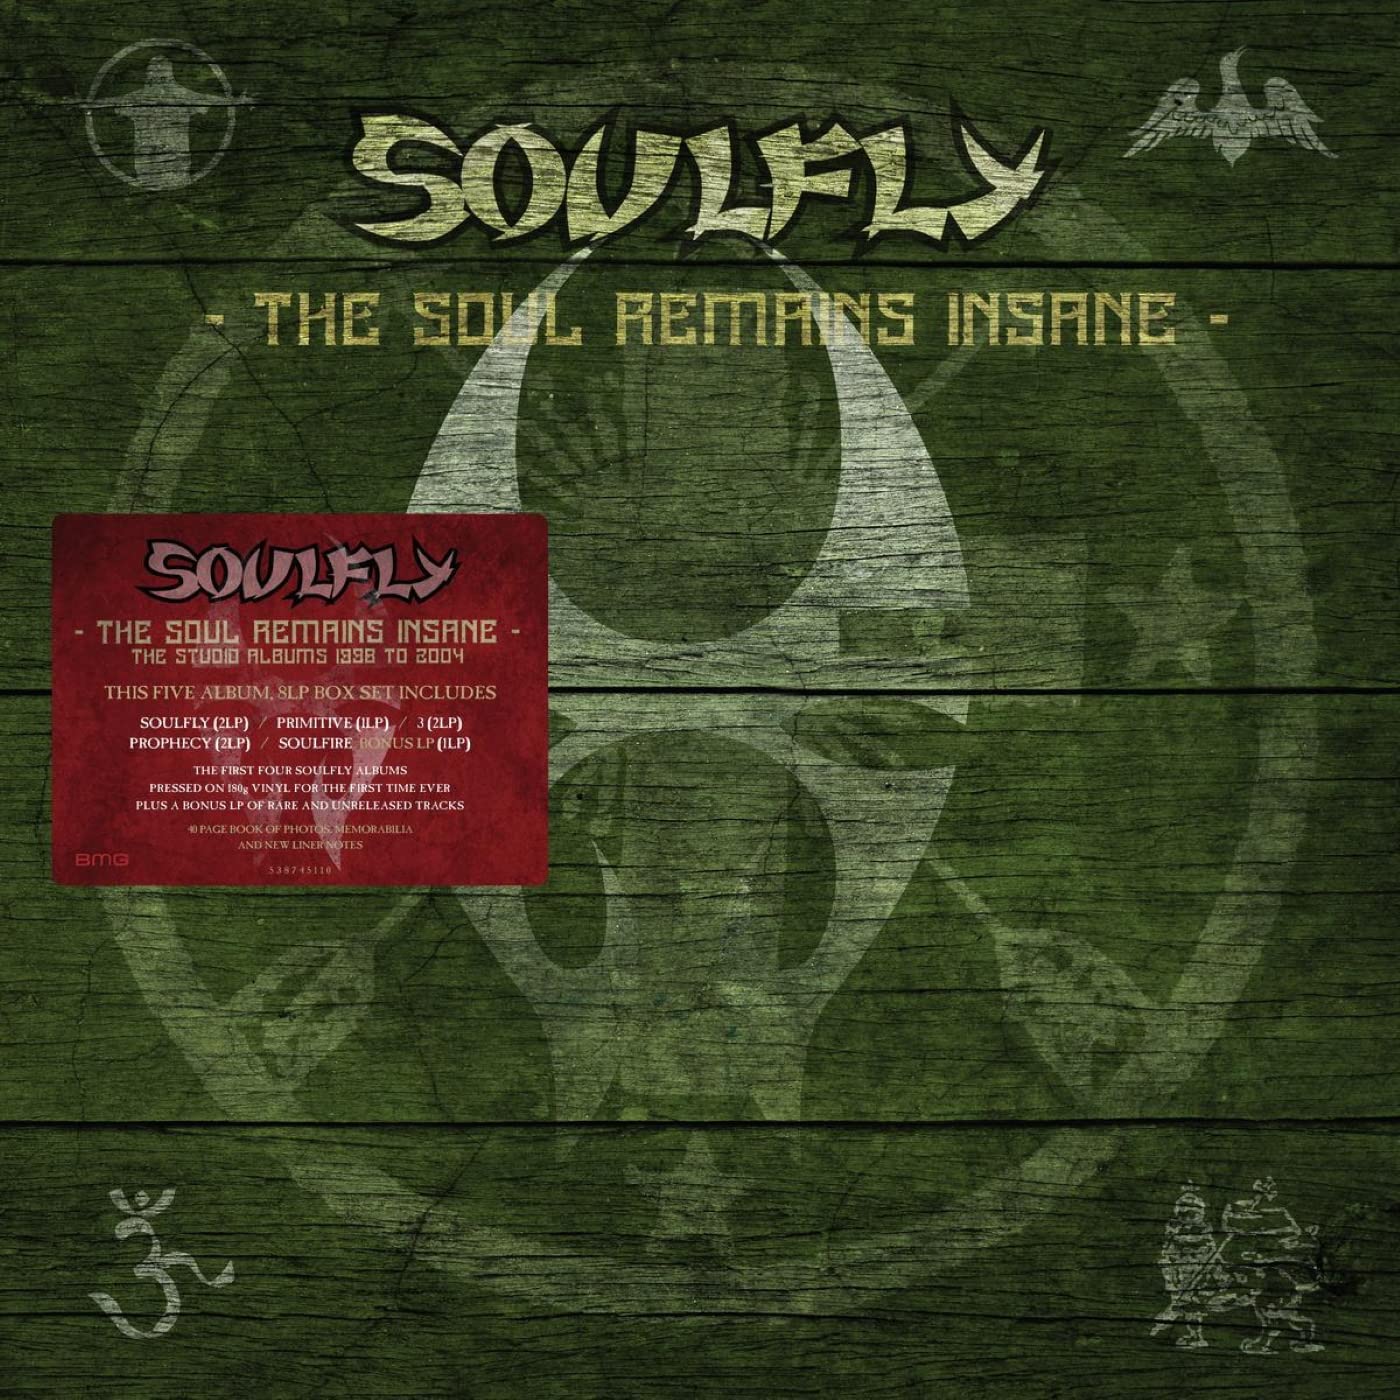 Soulfly, The Soul Remains Insane: The Studio Albums 1998 to 2004, CD